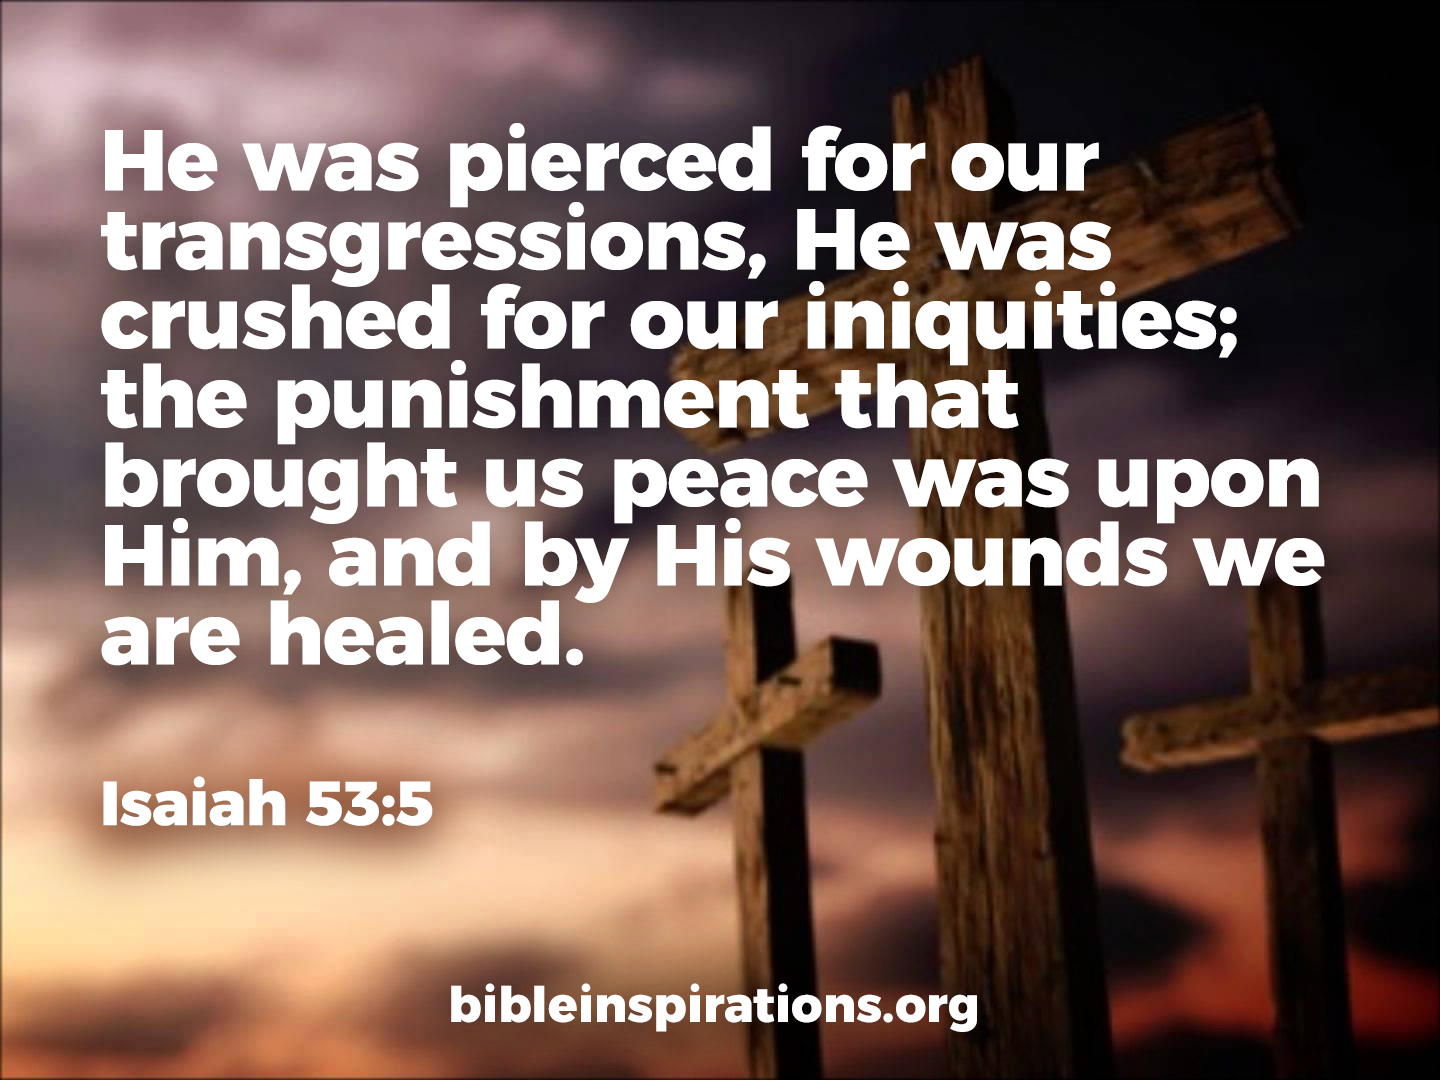 He was pierced for our transgressions, He was crushed for our iniquities; the punishment that brought us peace was upon Him, and by His wounds we are healed.  Isaiah 53:5 